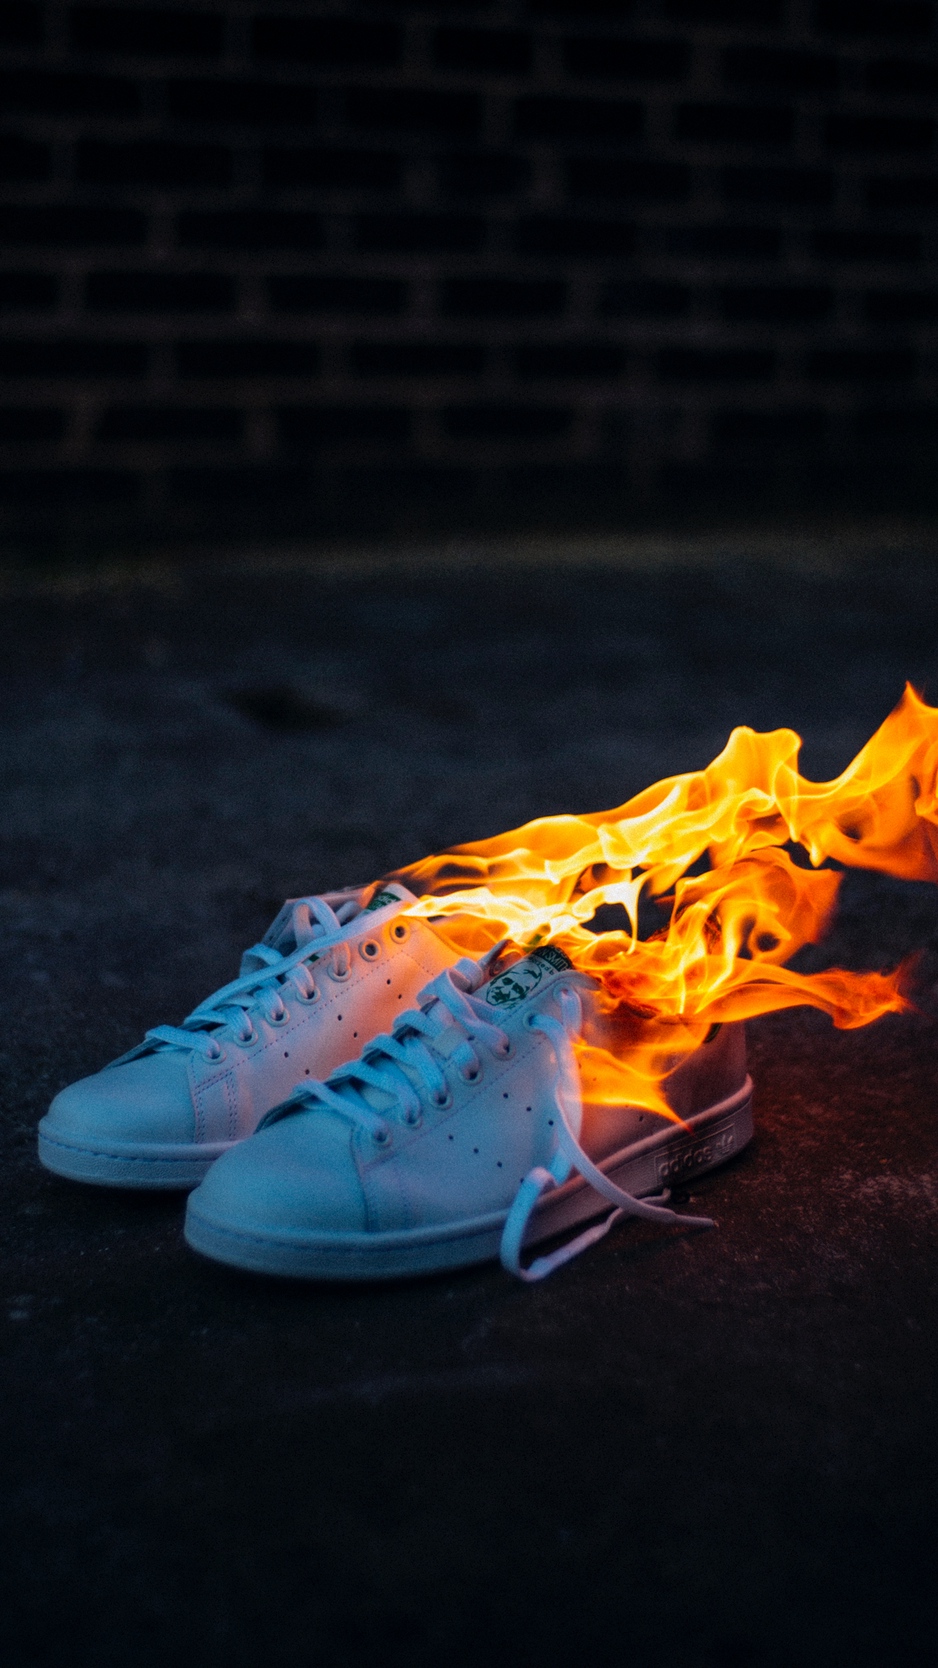 Wallpaper Sneakers Fire Flame iPhone 6s